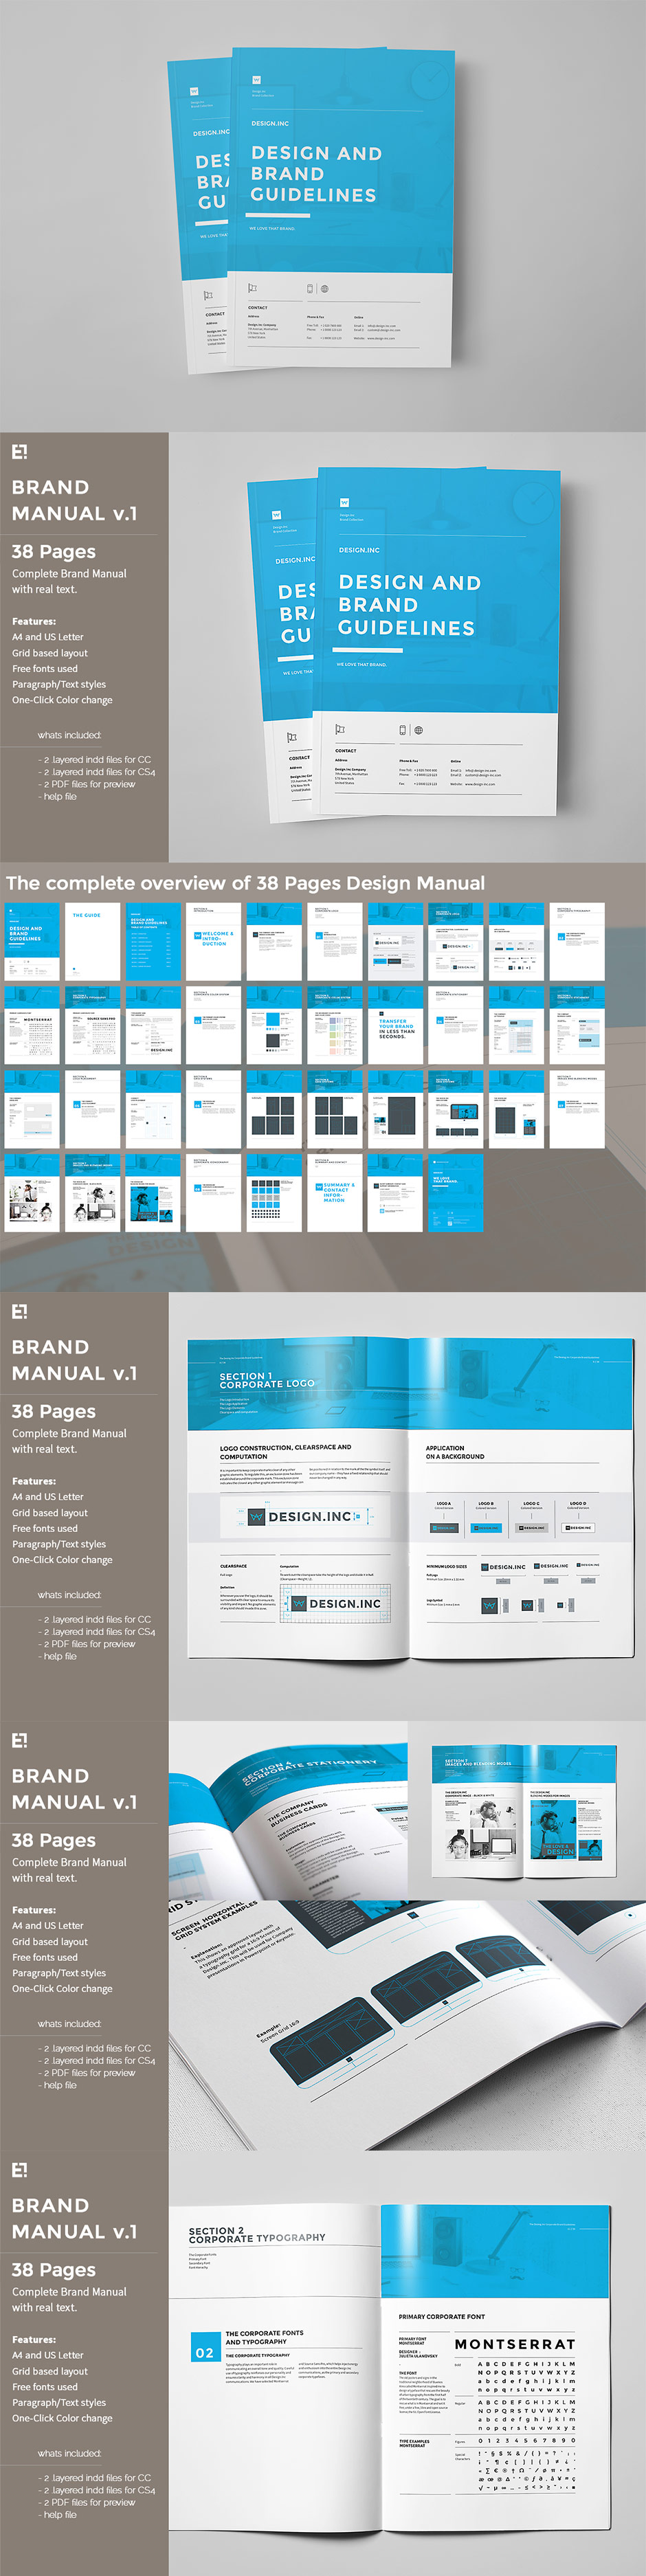 The Complete Professional Designer's Toolkit